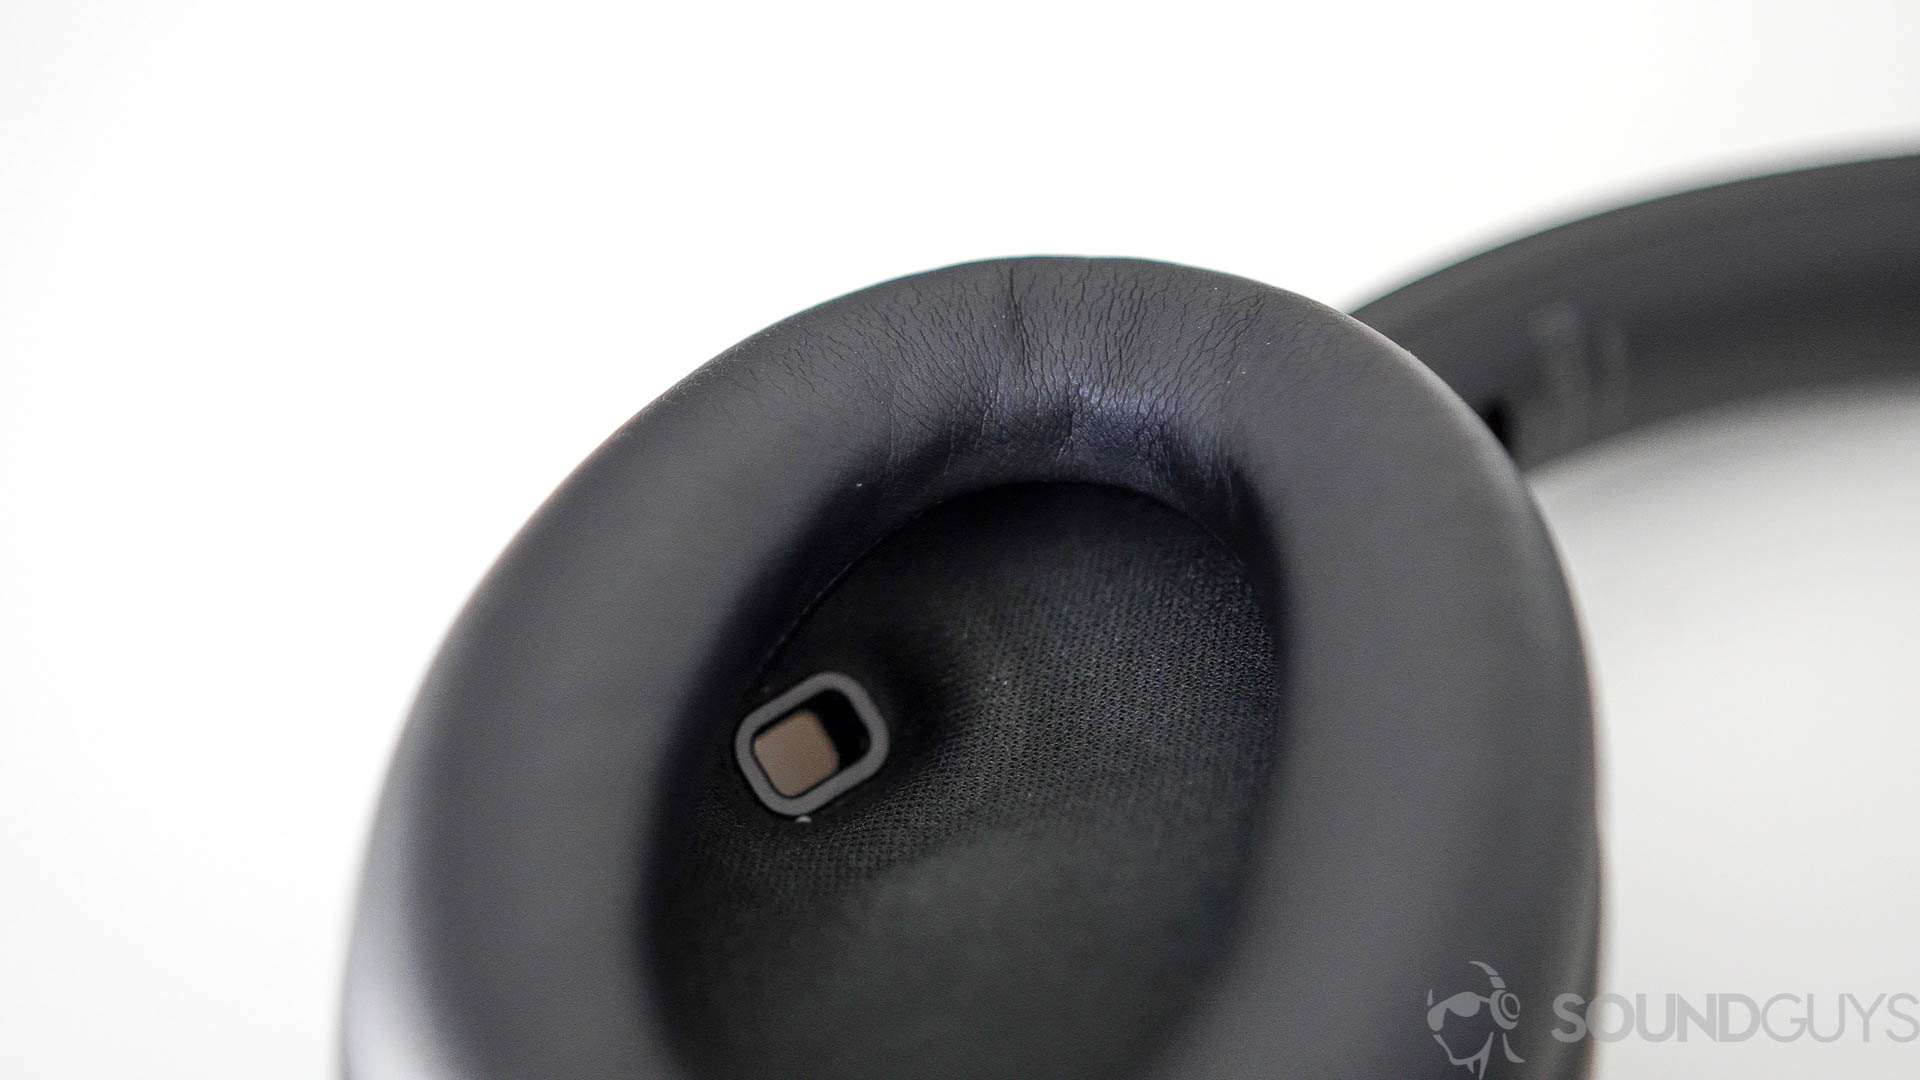 A close-up photo of the proximity sensor on the inside of the left earcup of the Sony WH-1000XM4 headphones to demonstrate the differences of the Sony WH-1000XM4 vs Shure AONIC 50.